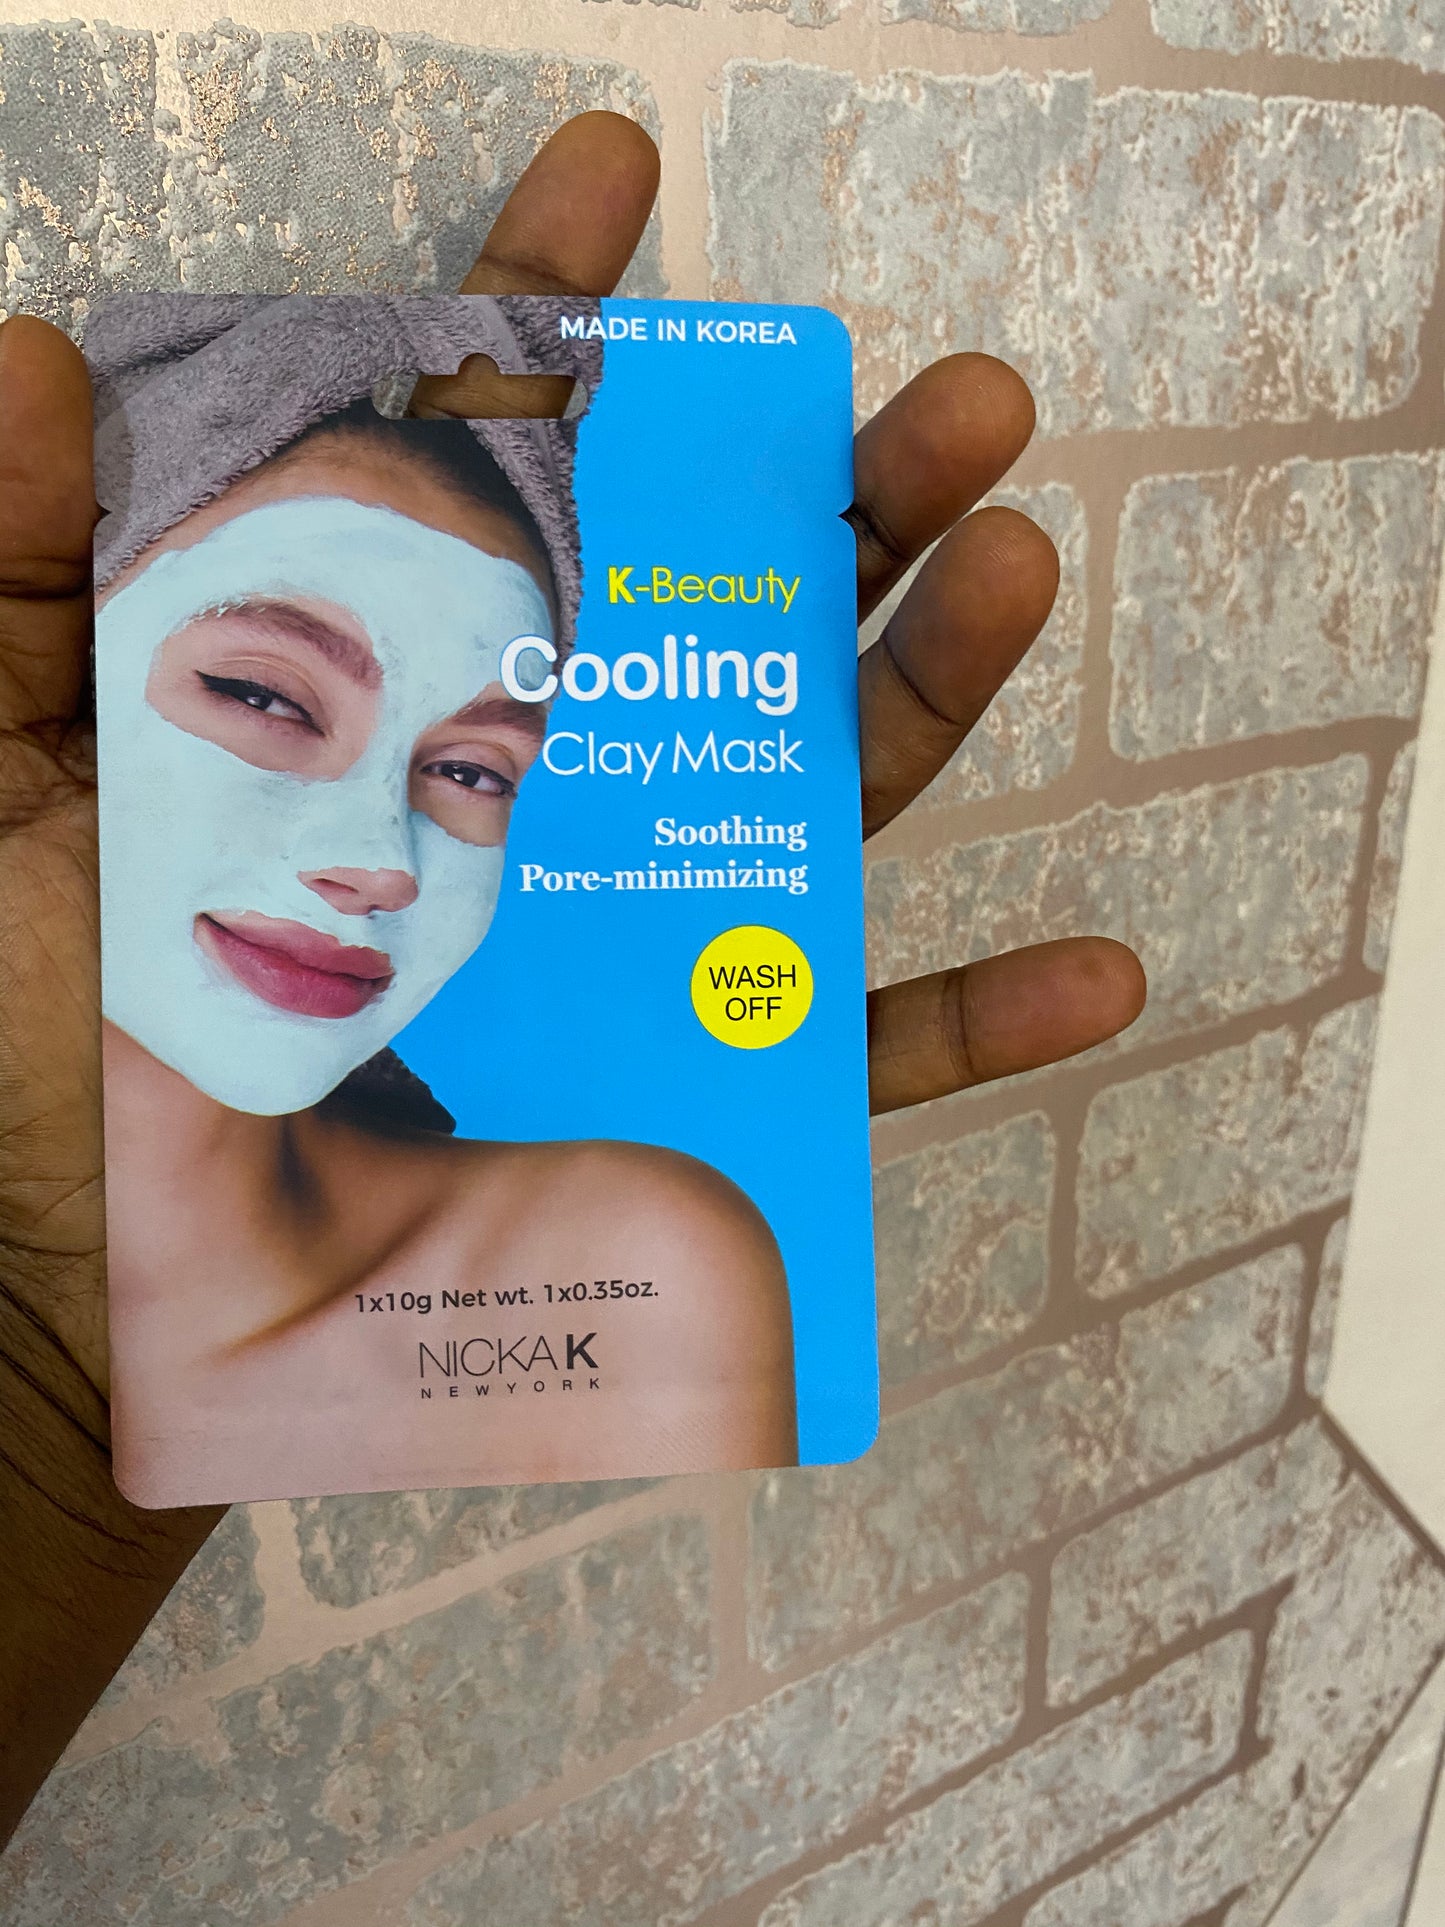 Nickak K-Beauty Cooling Clay Mask